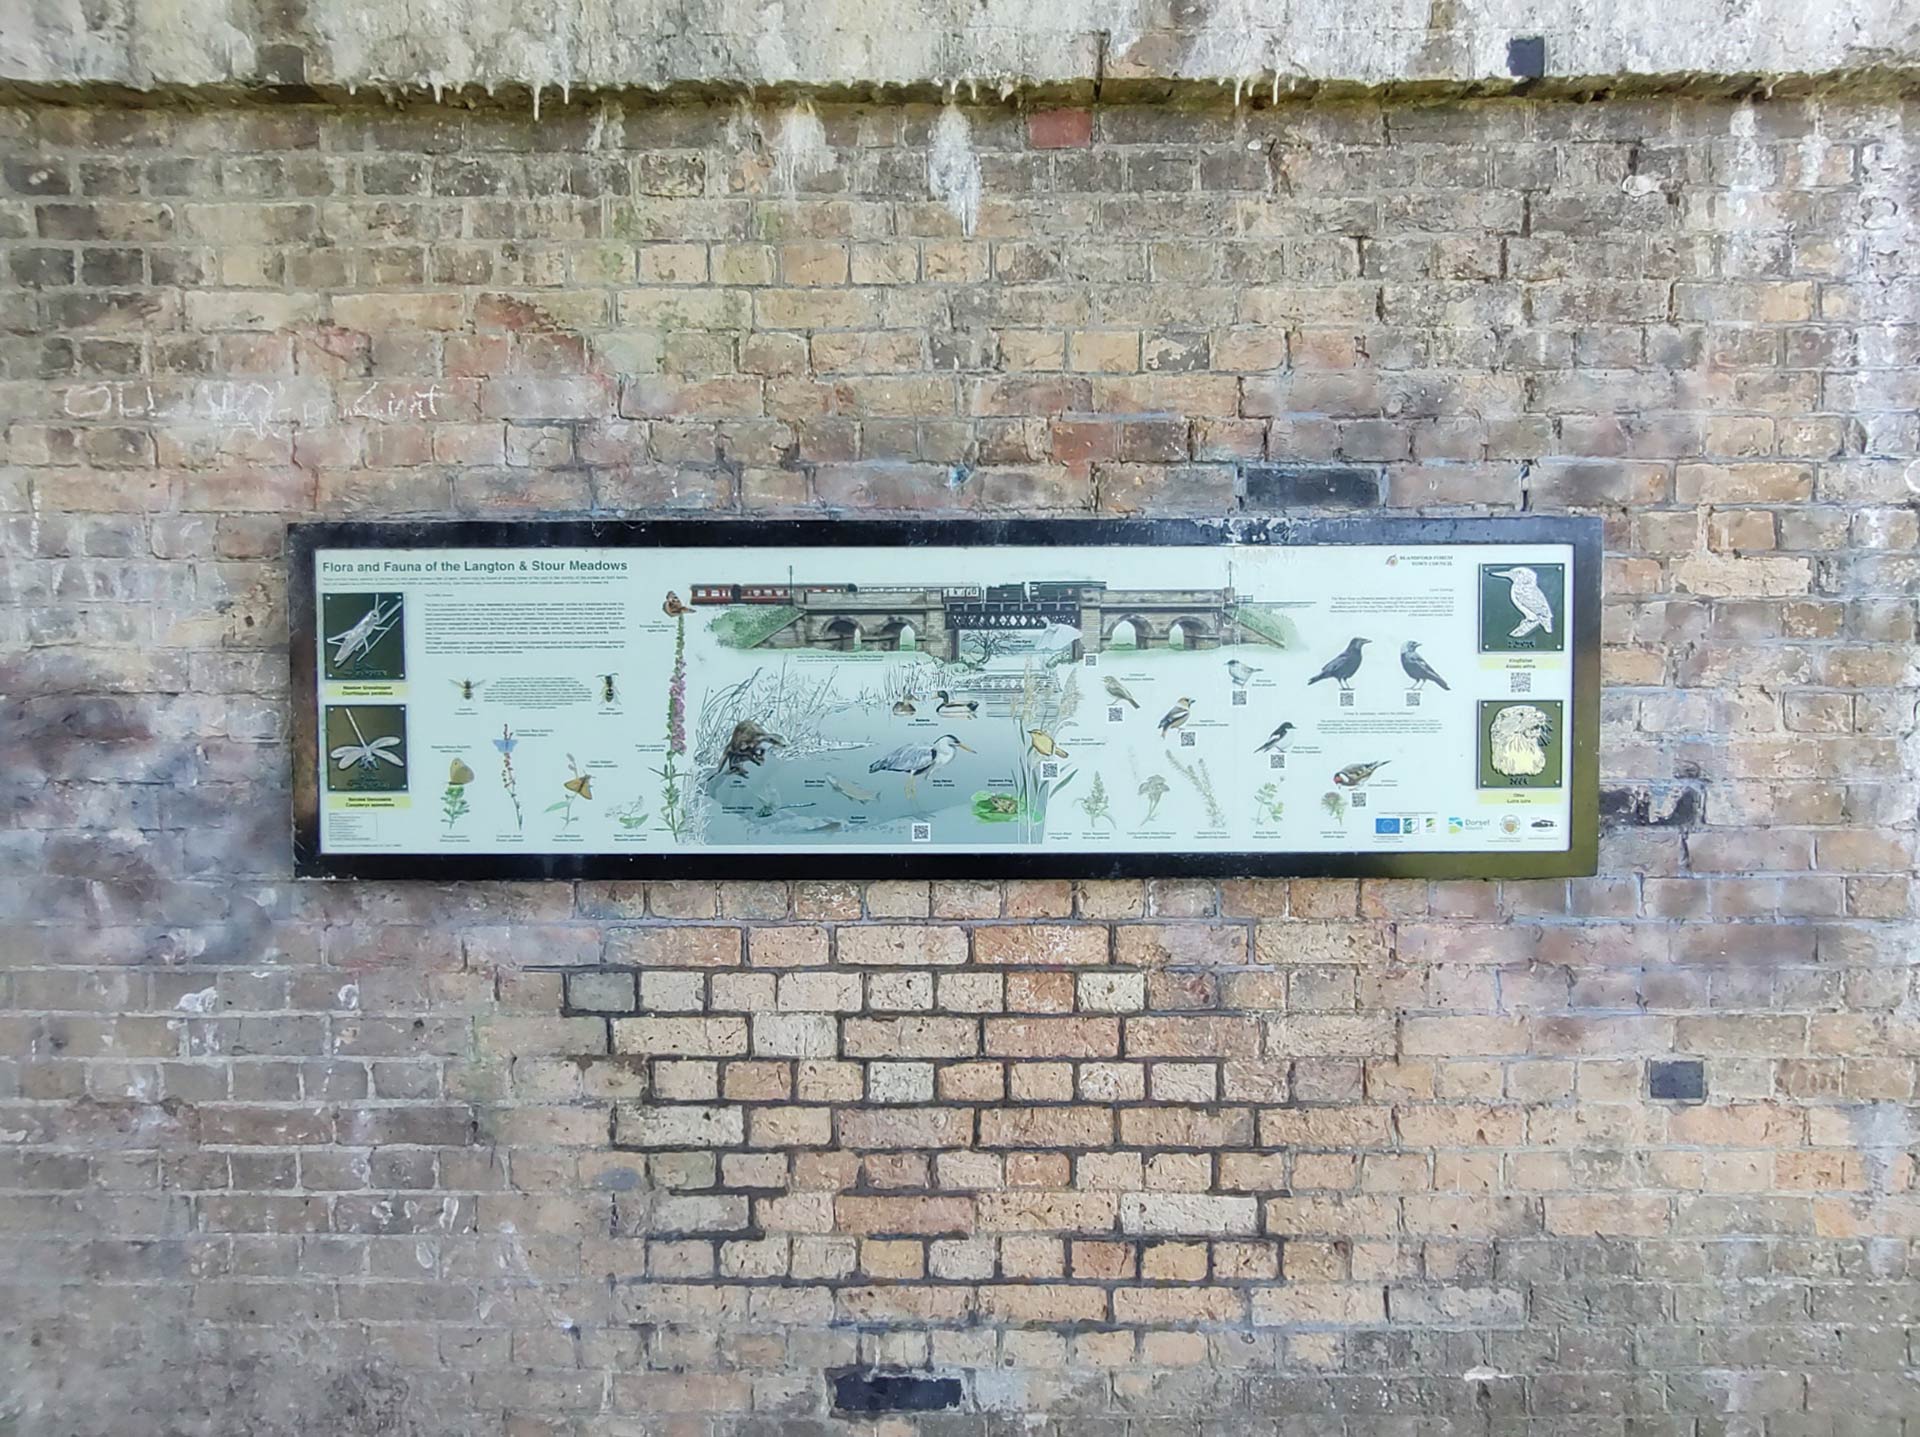 information sign about flora and fauna of area attached to brickwork